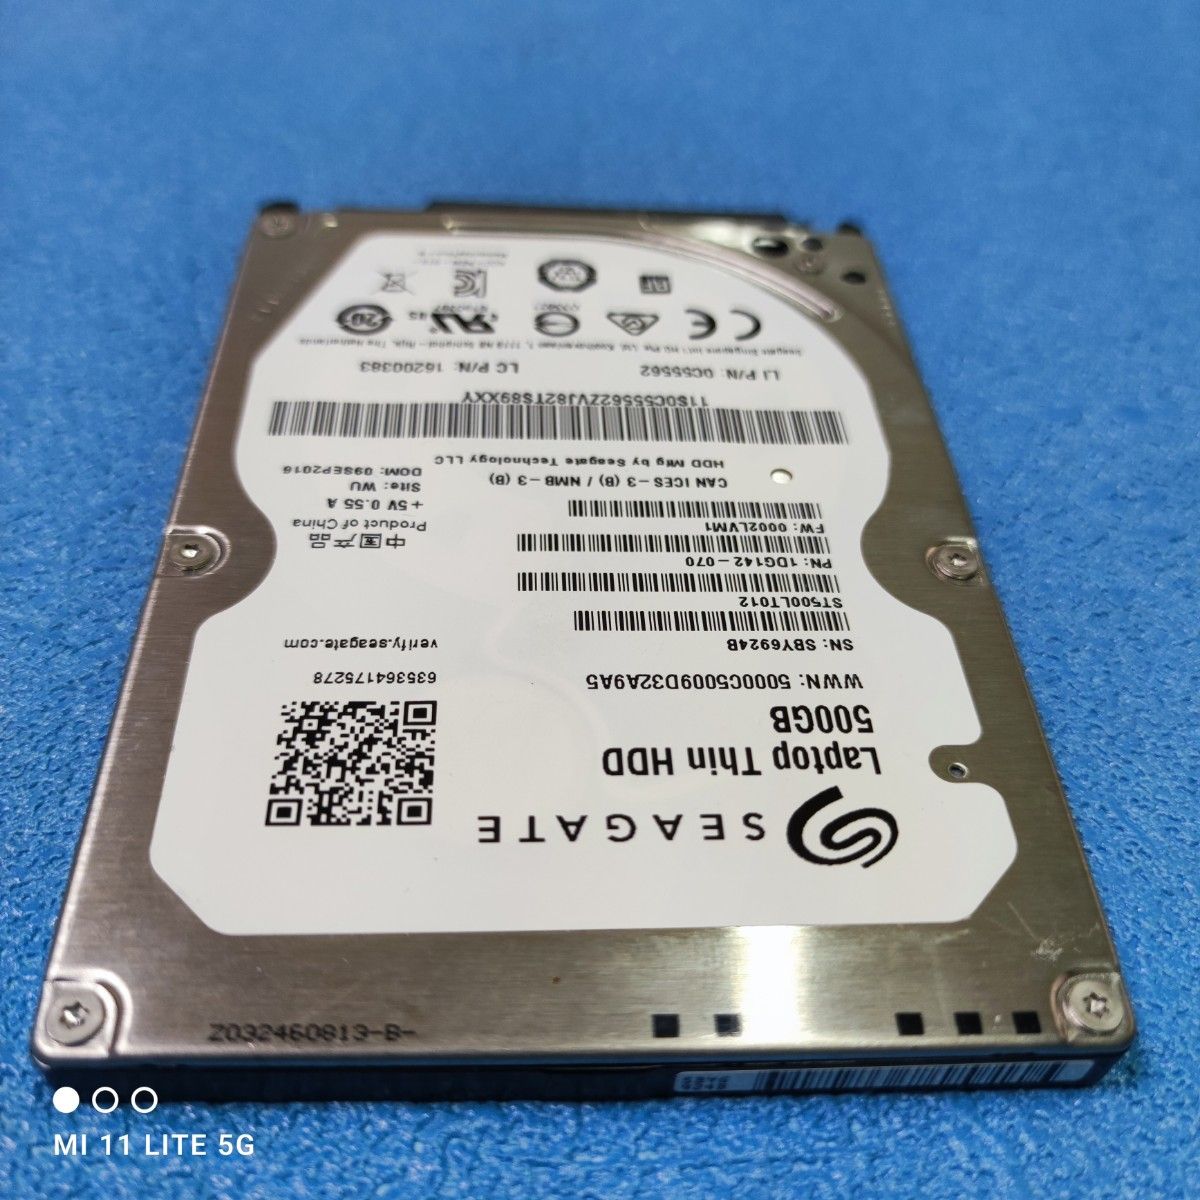 HDD500GBx2点セット 2.5インチ 7mm 5400RPM（WD&SEAGATE）